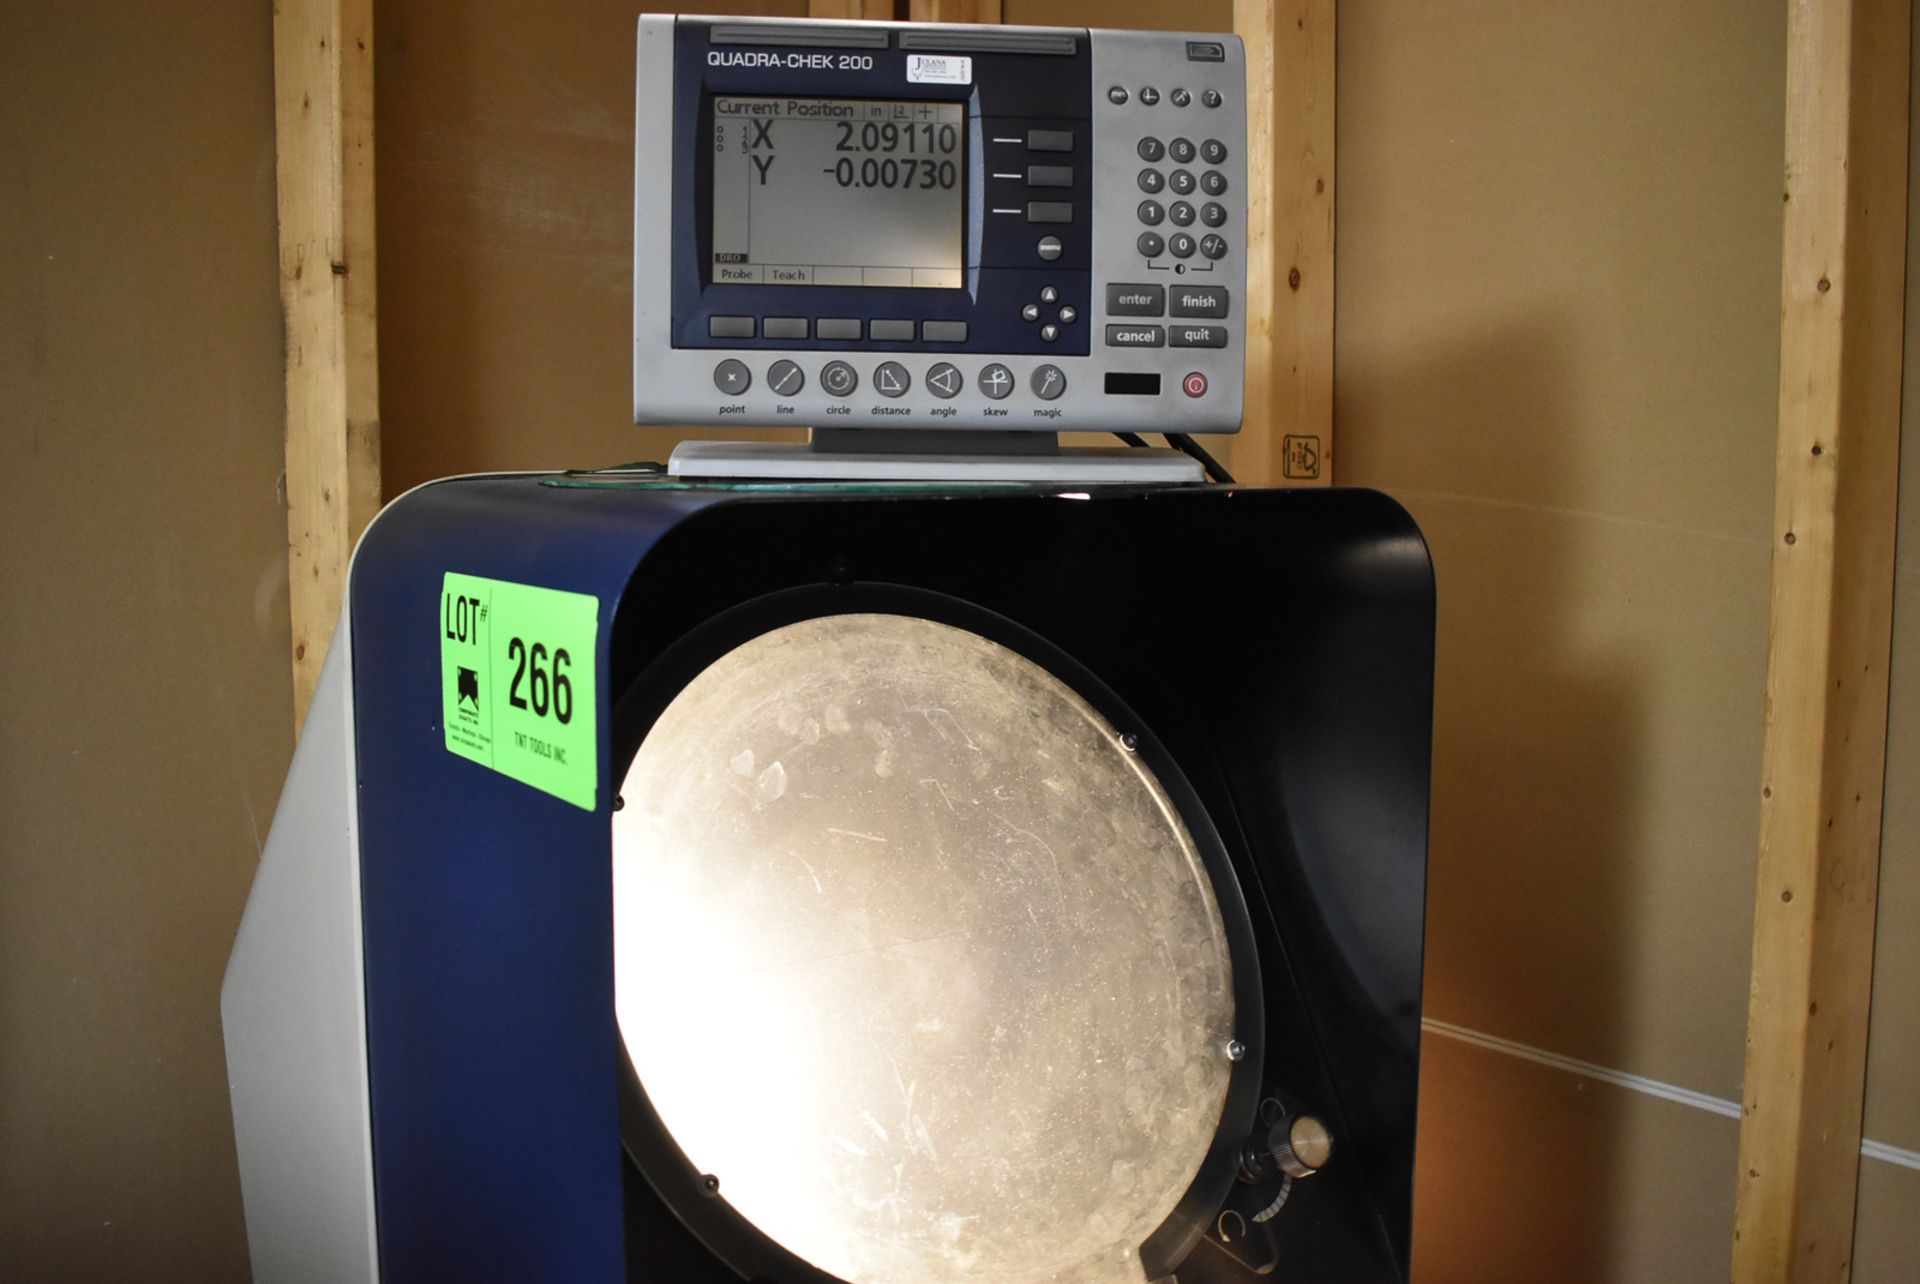 MITUTOYO PH-14LS OPTICAL COMPARATOR WITH 14" SCREEN, MITUTOYO QUADRACHECK 200 2-AXIS SMART DRO, - Image 2 of 2